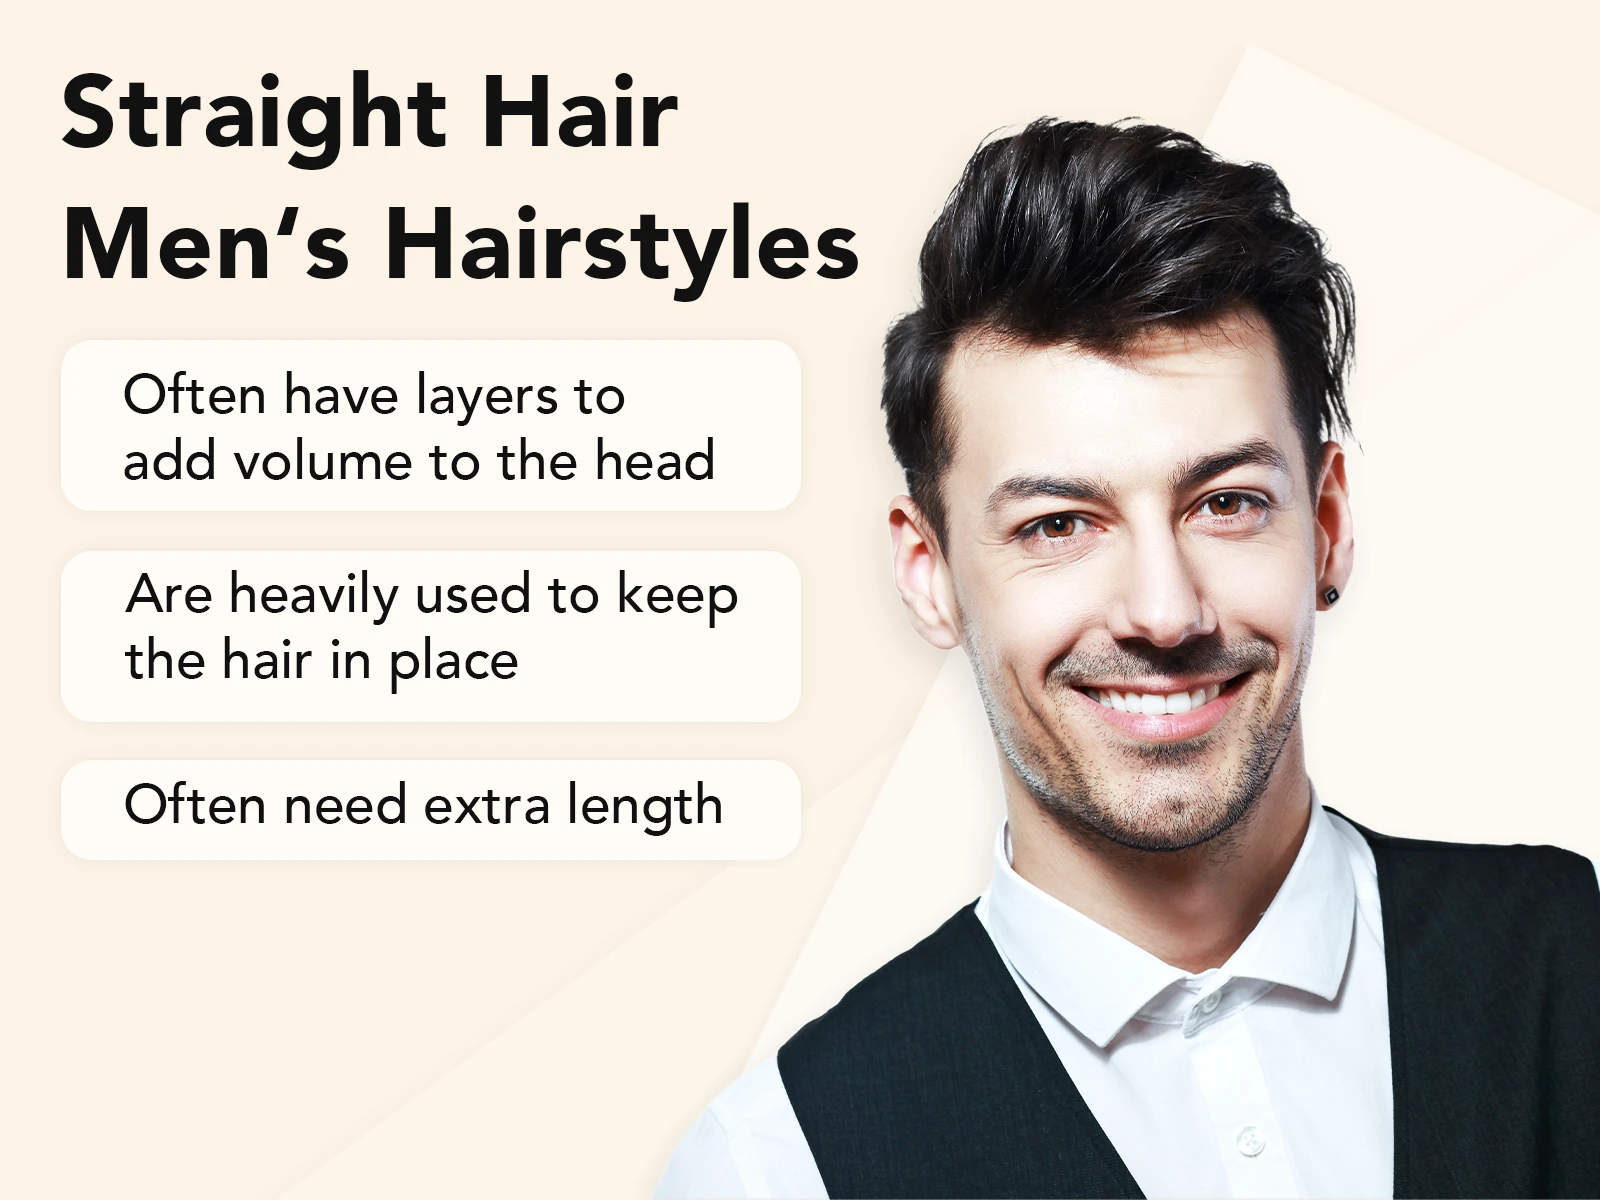 Explainer showing what all straight hair men's hairstyles have in common